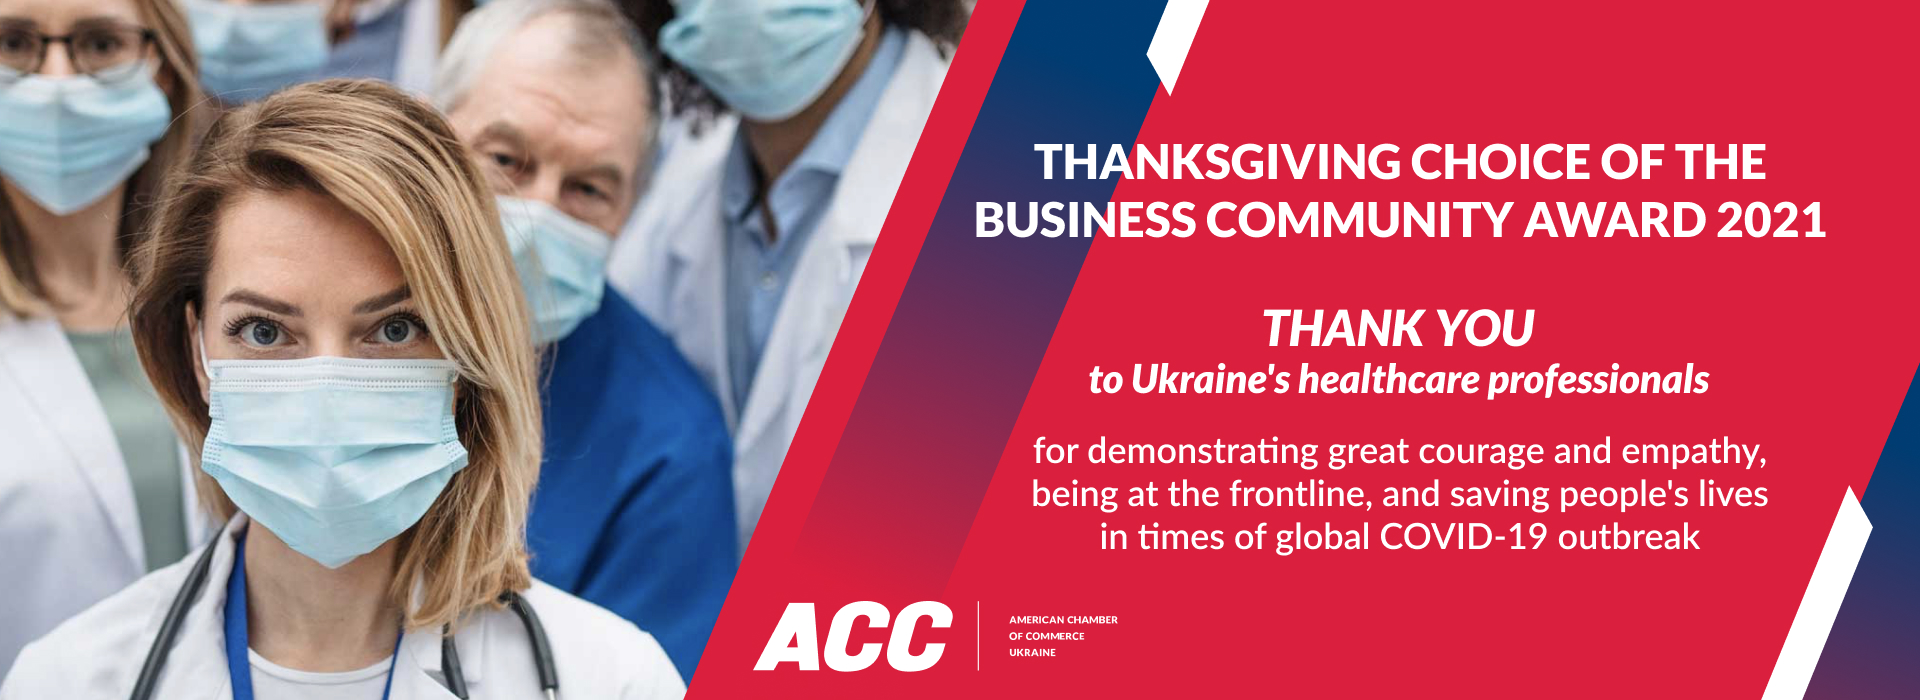 American Chamber of Commerce Presents the 2021 Thanksgiving Award to  Ukraine’s Healthcare Professionals